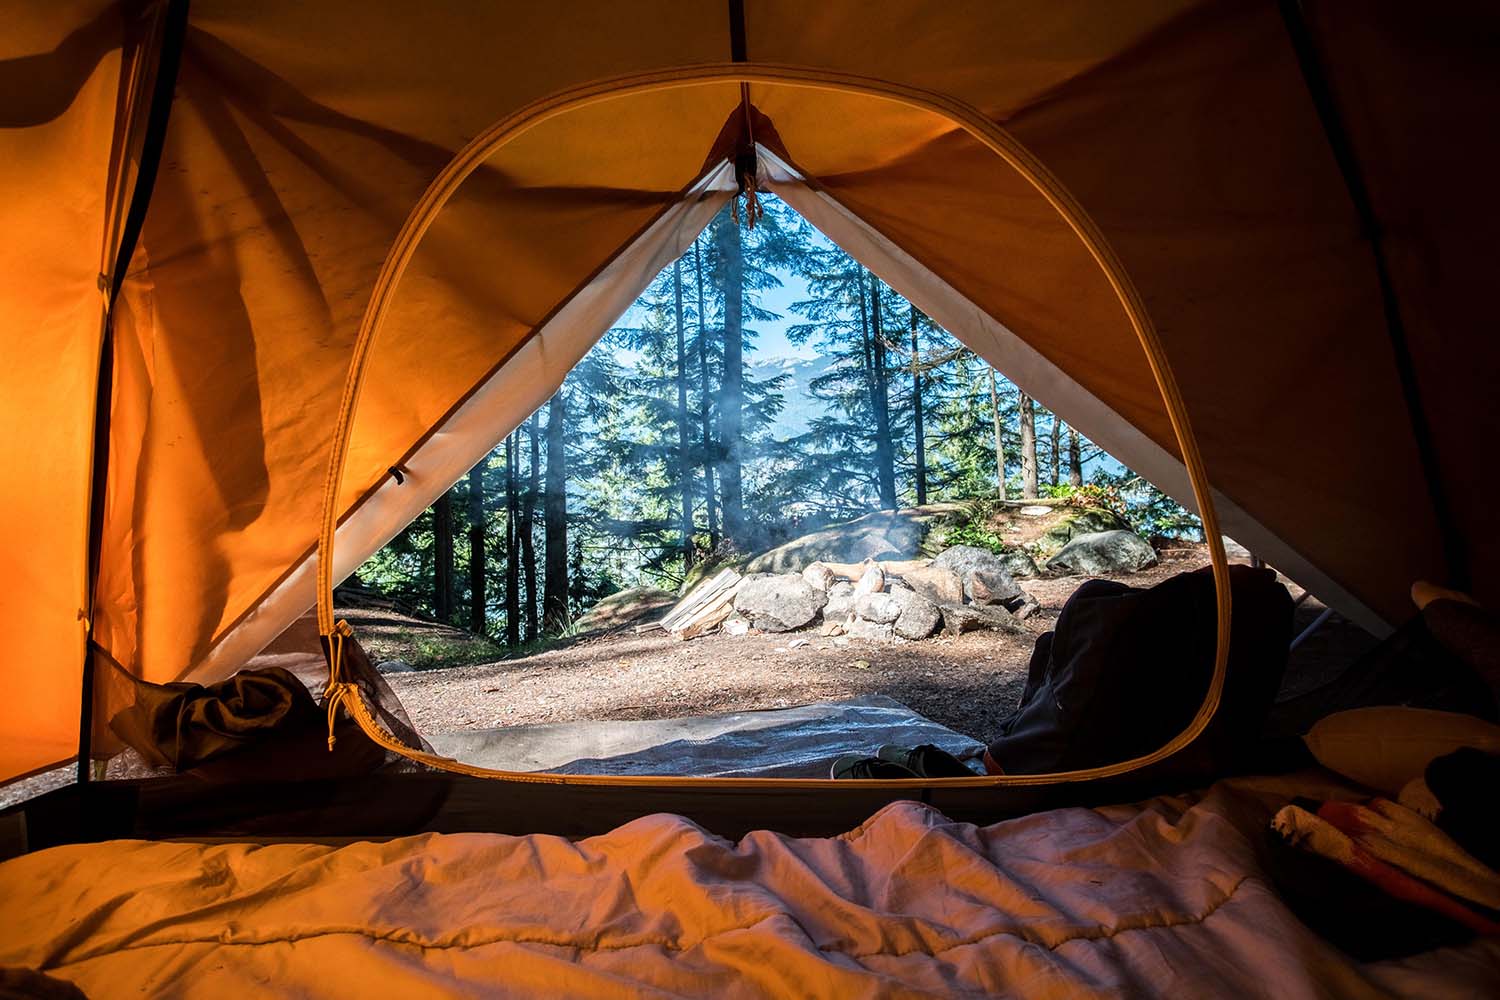 Camping Clothes: How To Dress Properly For Your Next Camping Trip